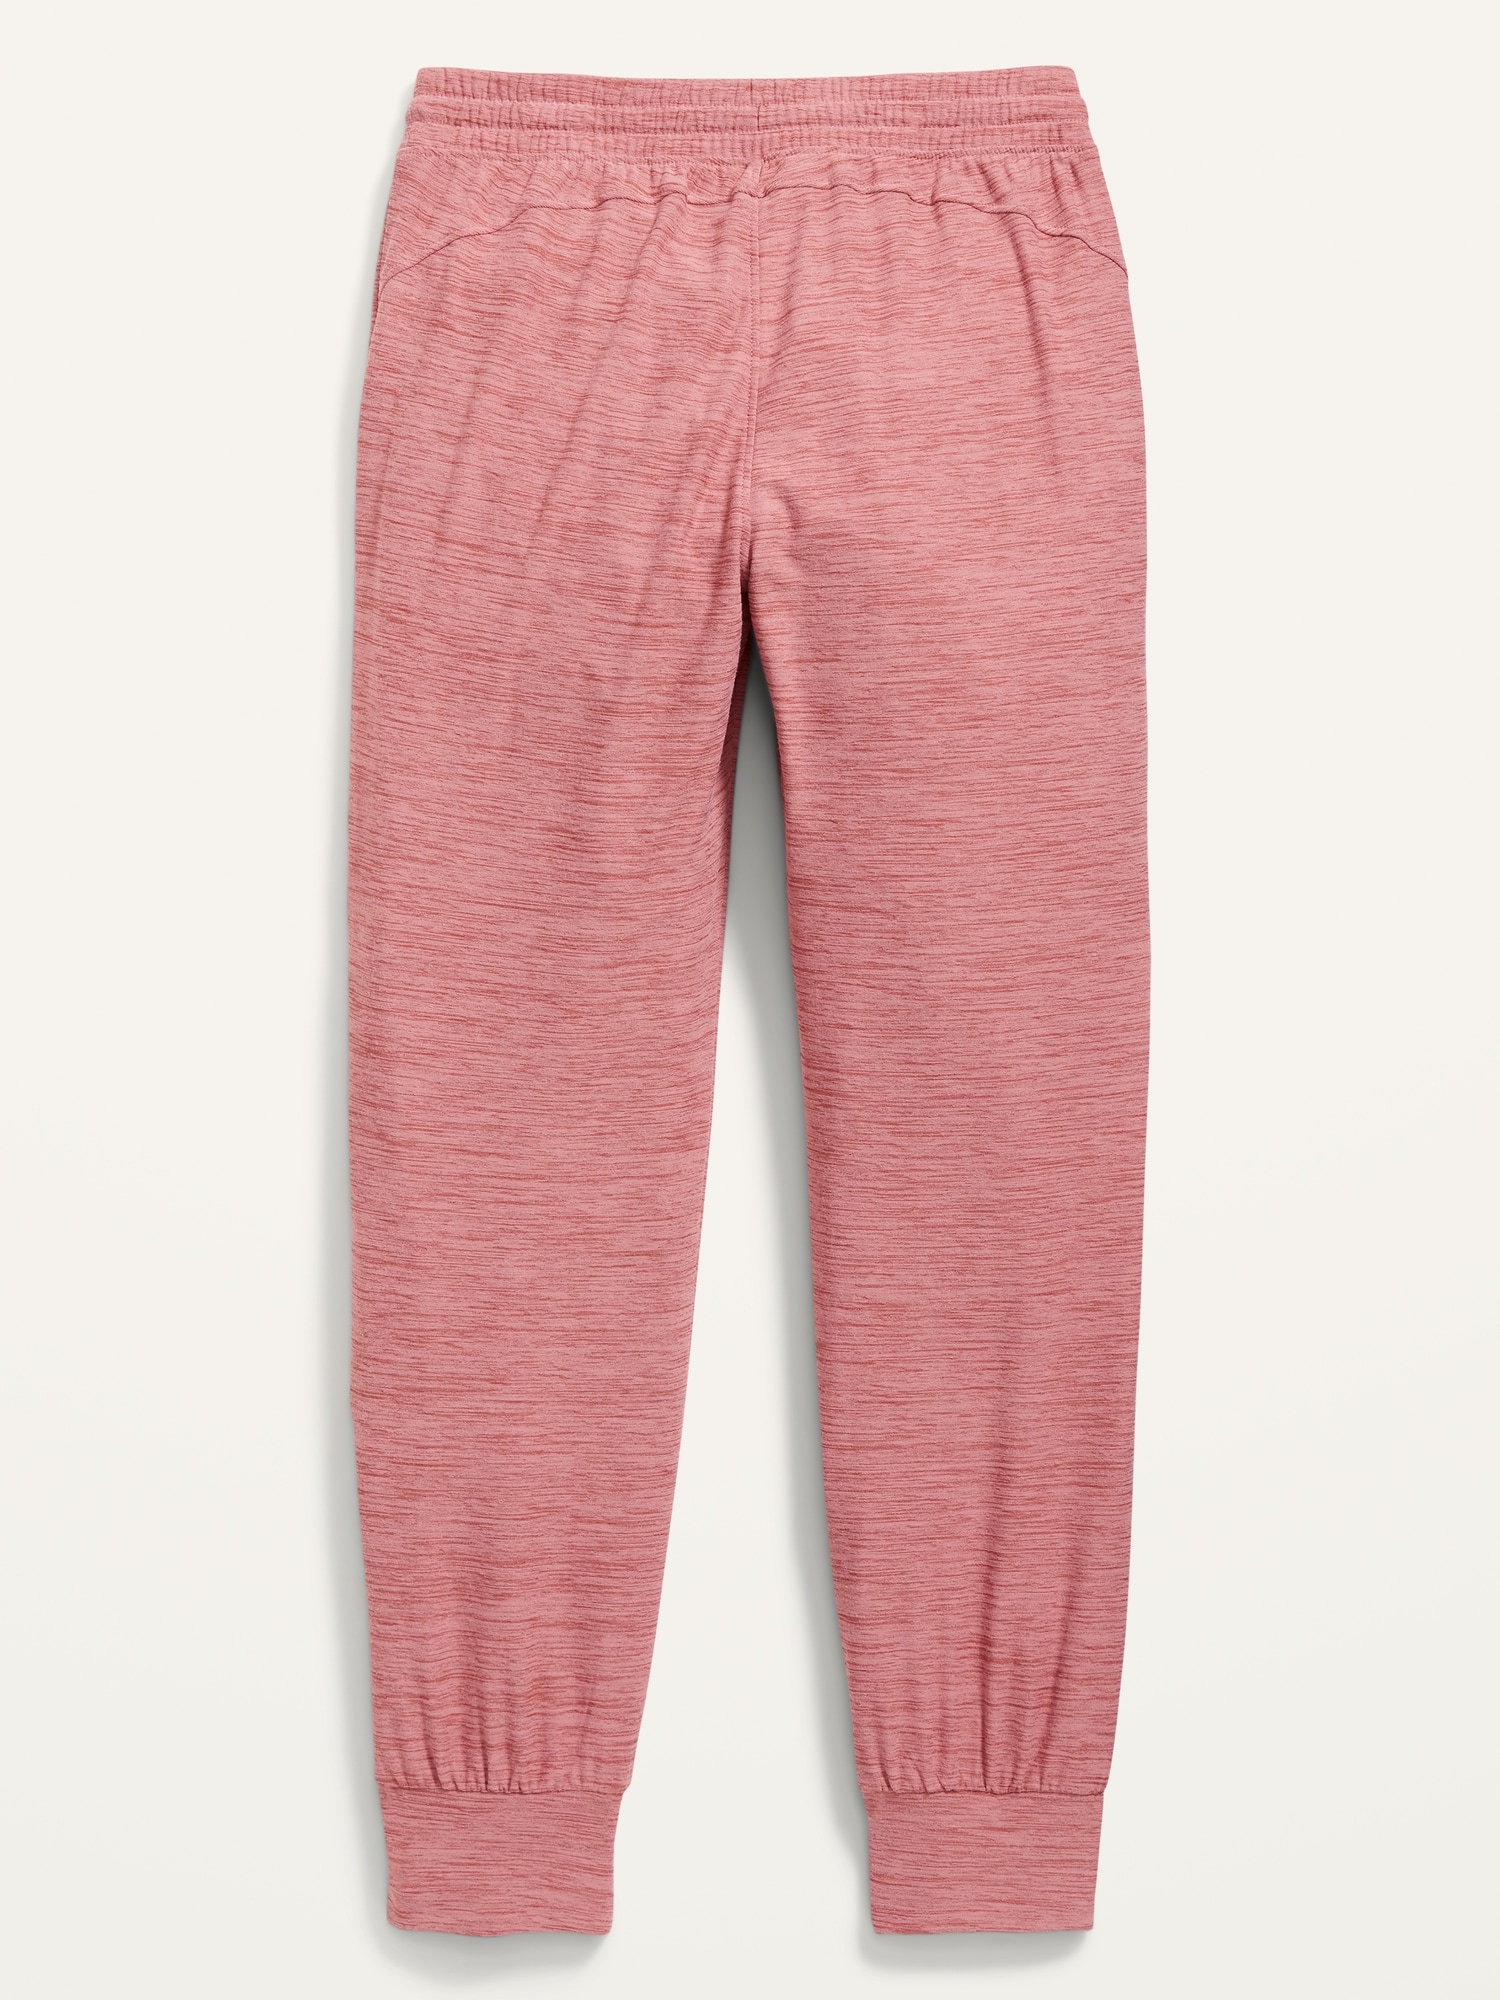 Old Navy Logo Jogger Sweatpants Girls size Medium Pink New with Tags